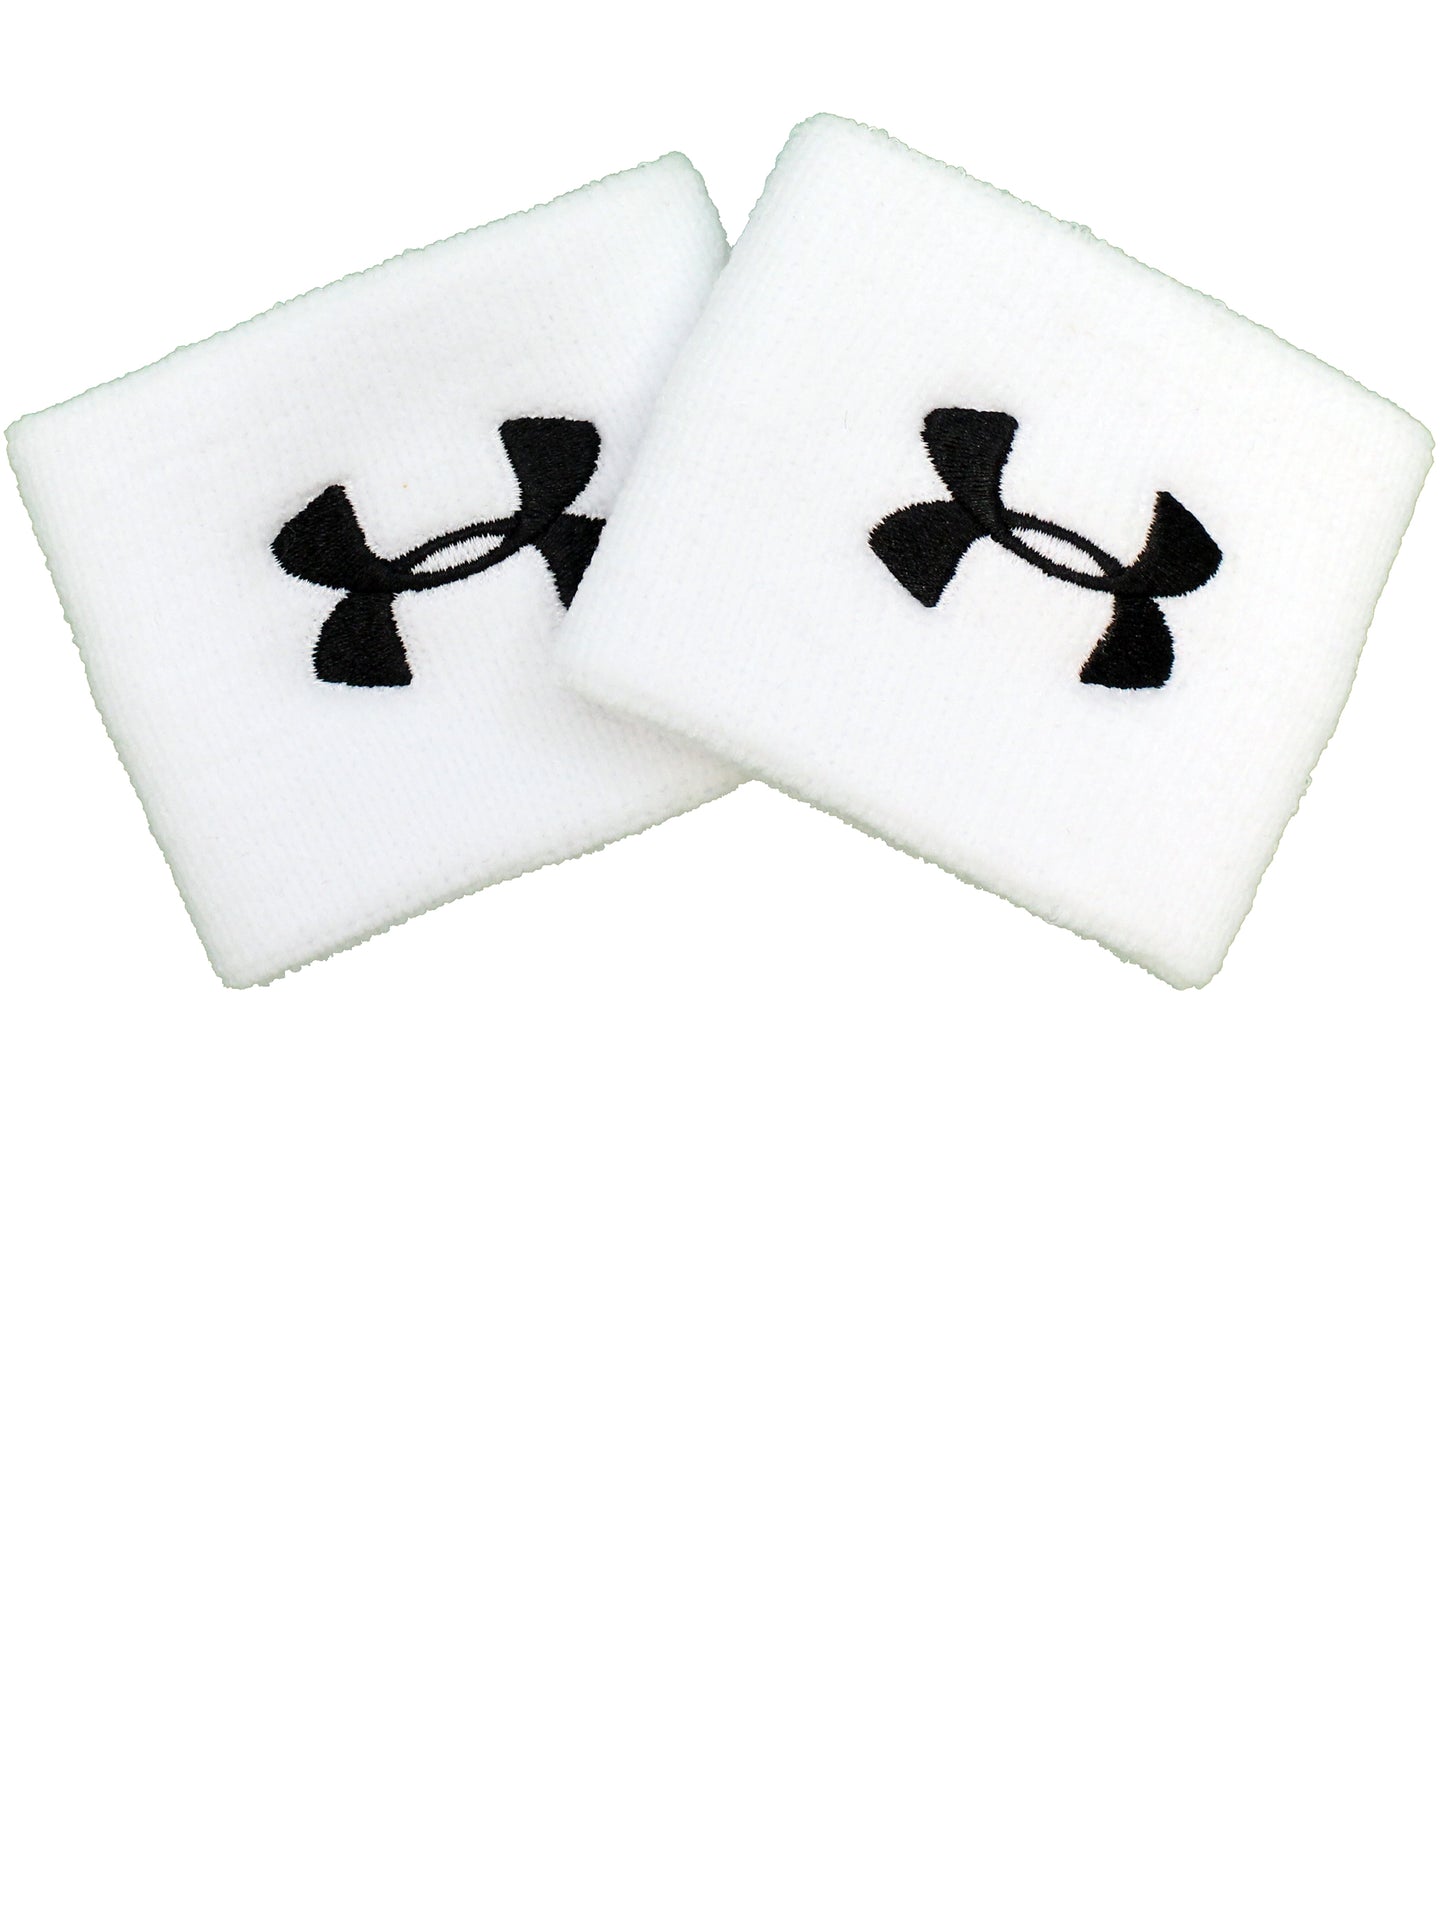 Under Armour Singlewide wristbands white 1276991-100